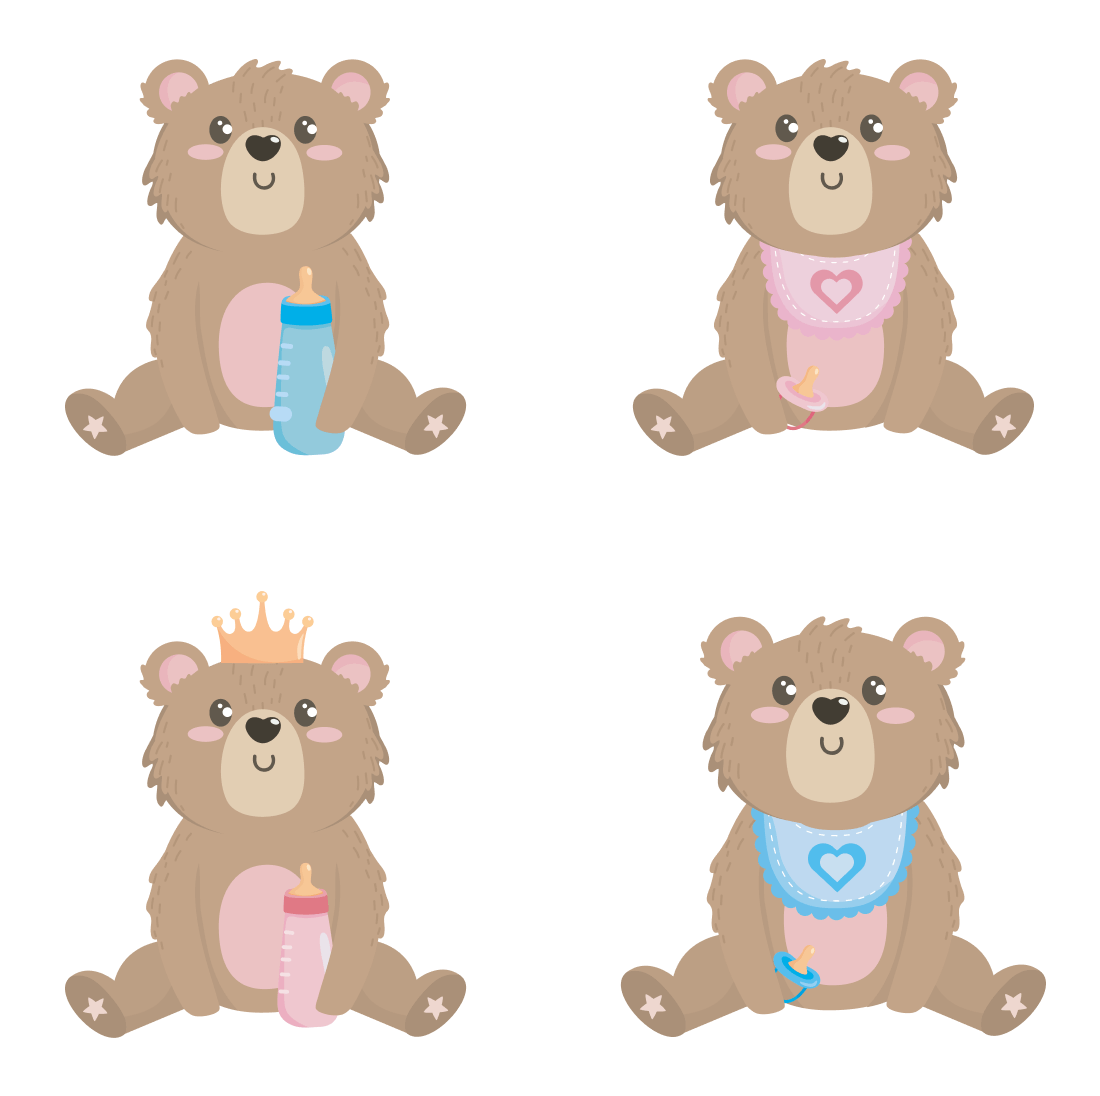 Small teddy bears with bibs and stars on their paws.